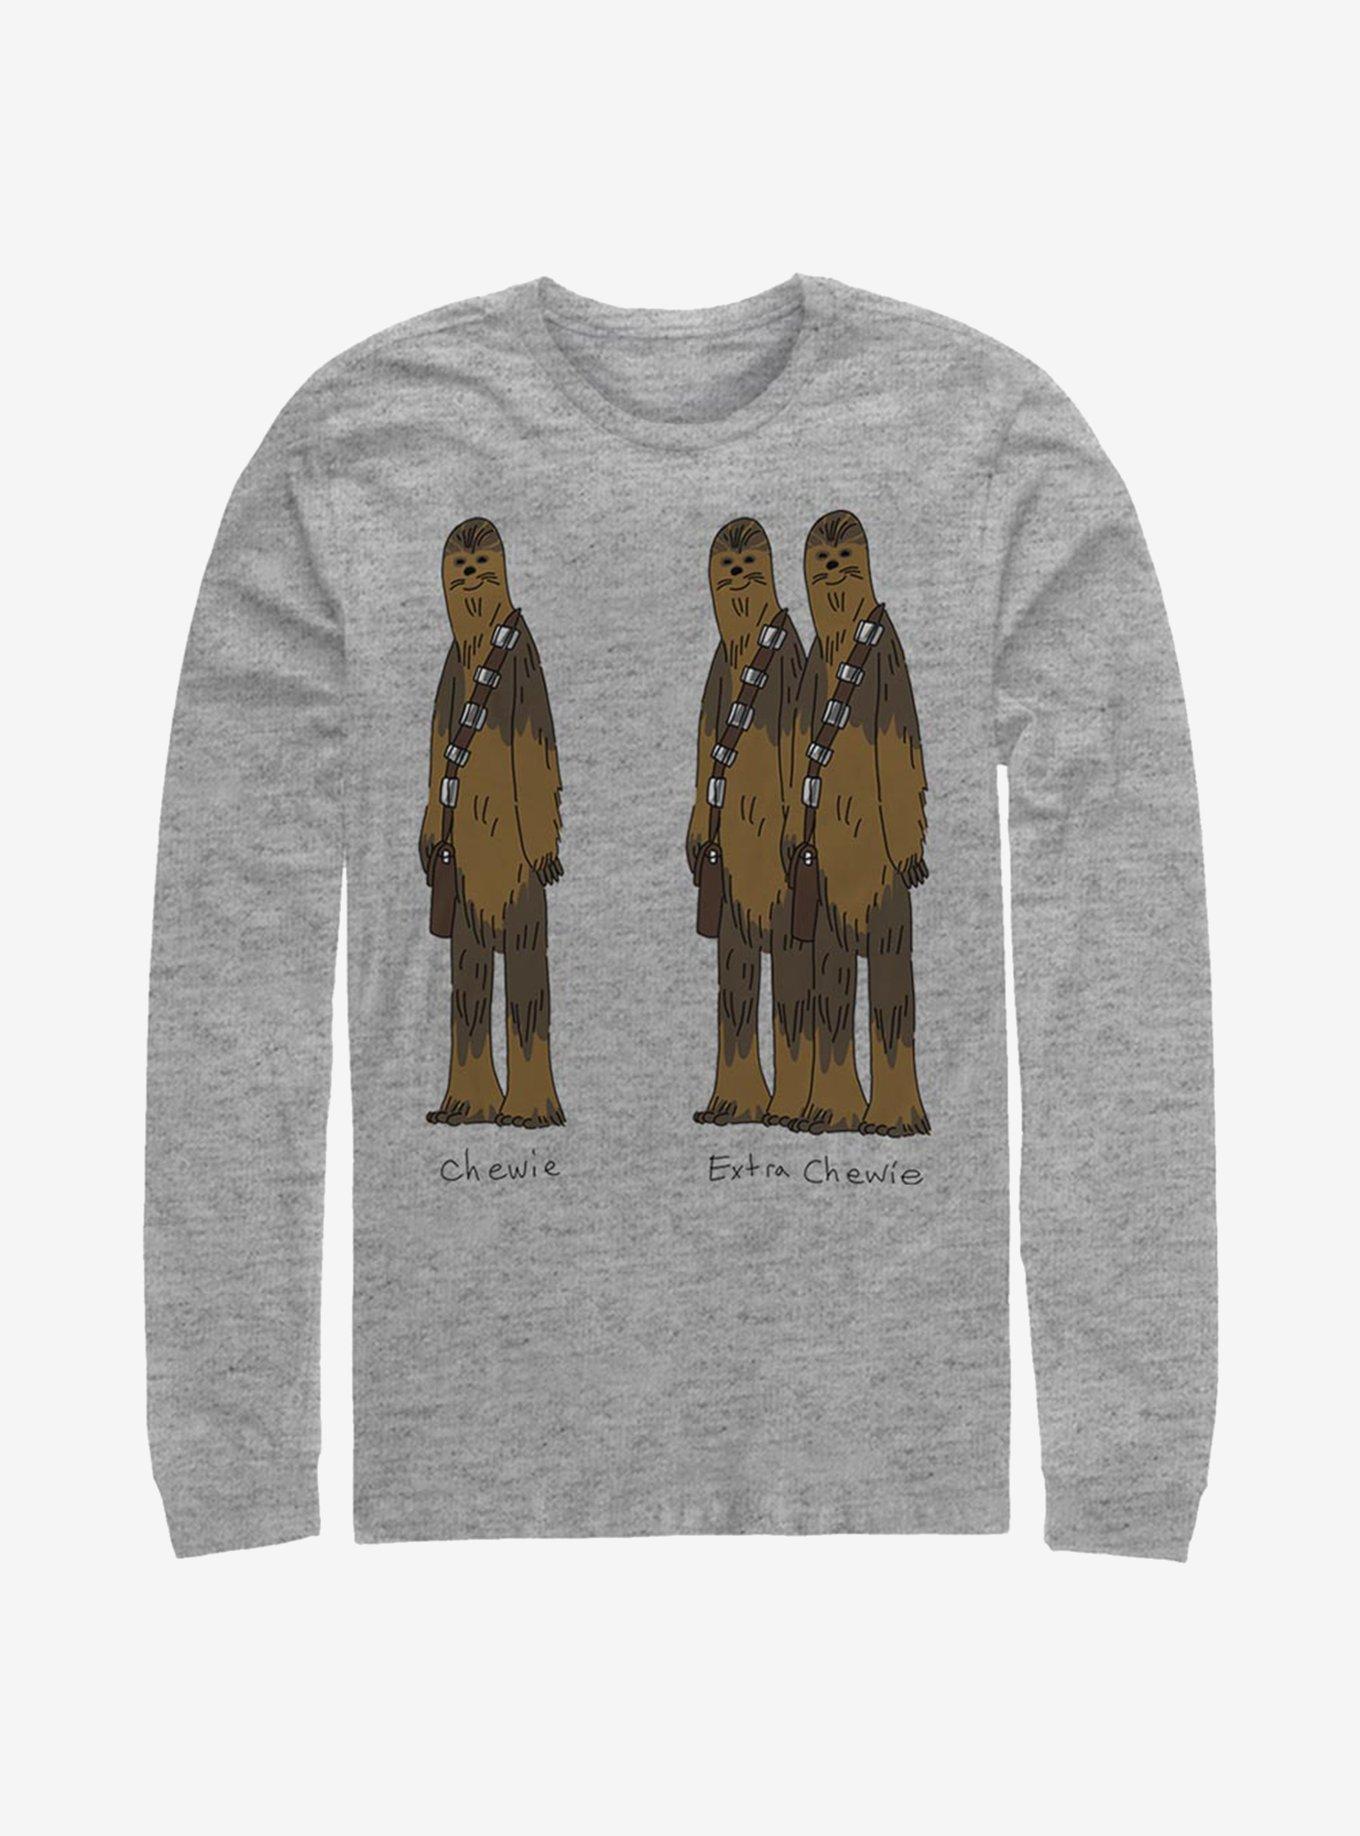 Star Wars Extra Chewie Long-Sleeve T-Shirt, , hi-res